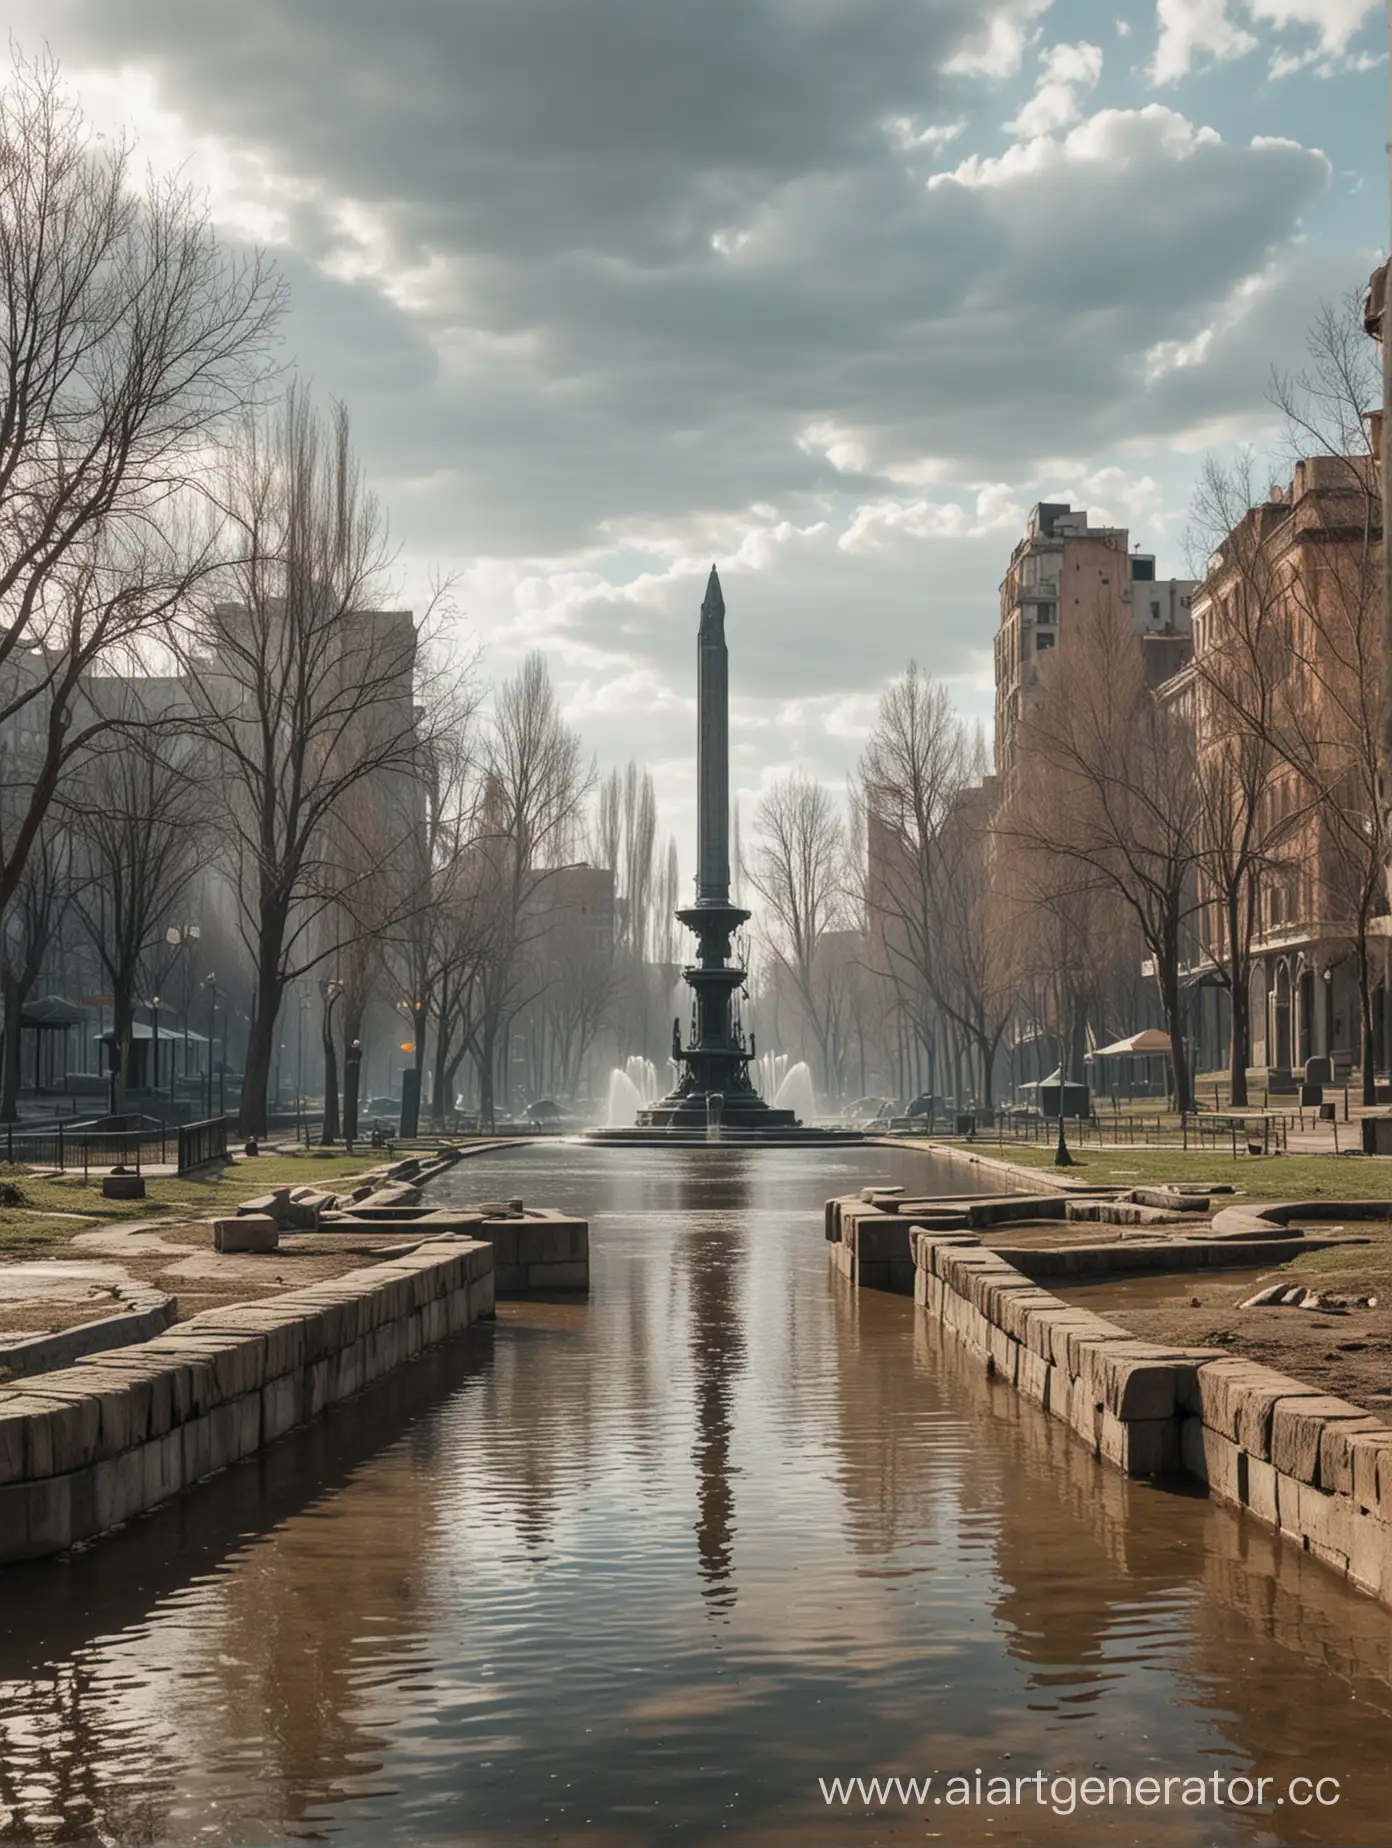 PostApocalyptic-City-Park-with-Monument-and-Fountain